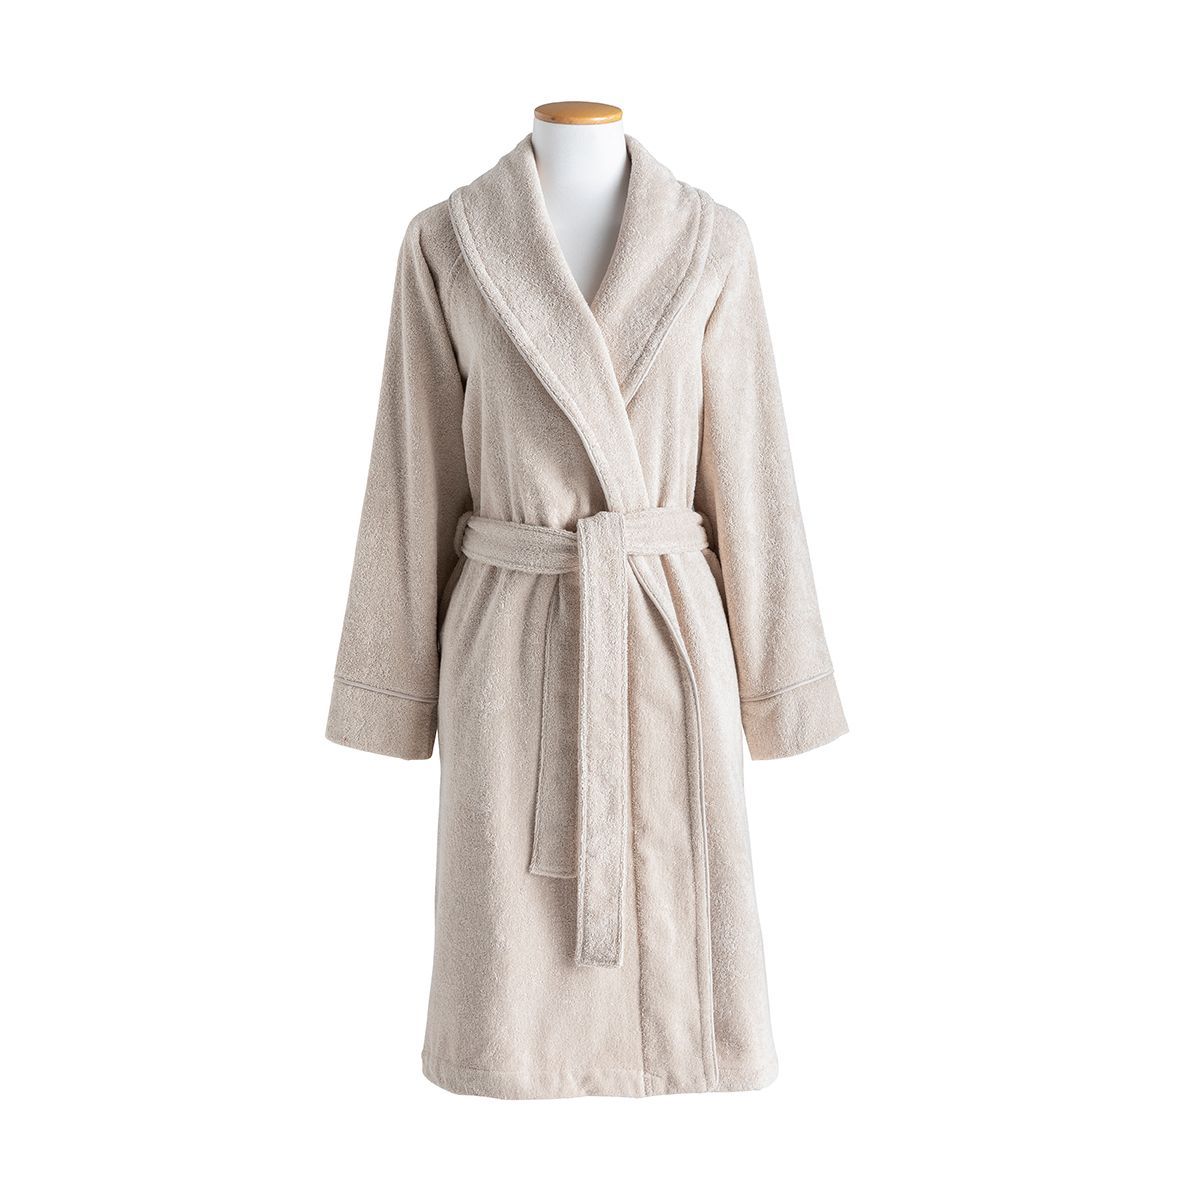 Ess-cale Gazelle Robe by Alexandre Turpault | Fig Linens and Home